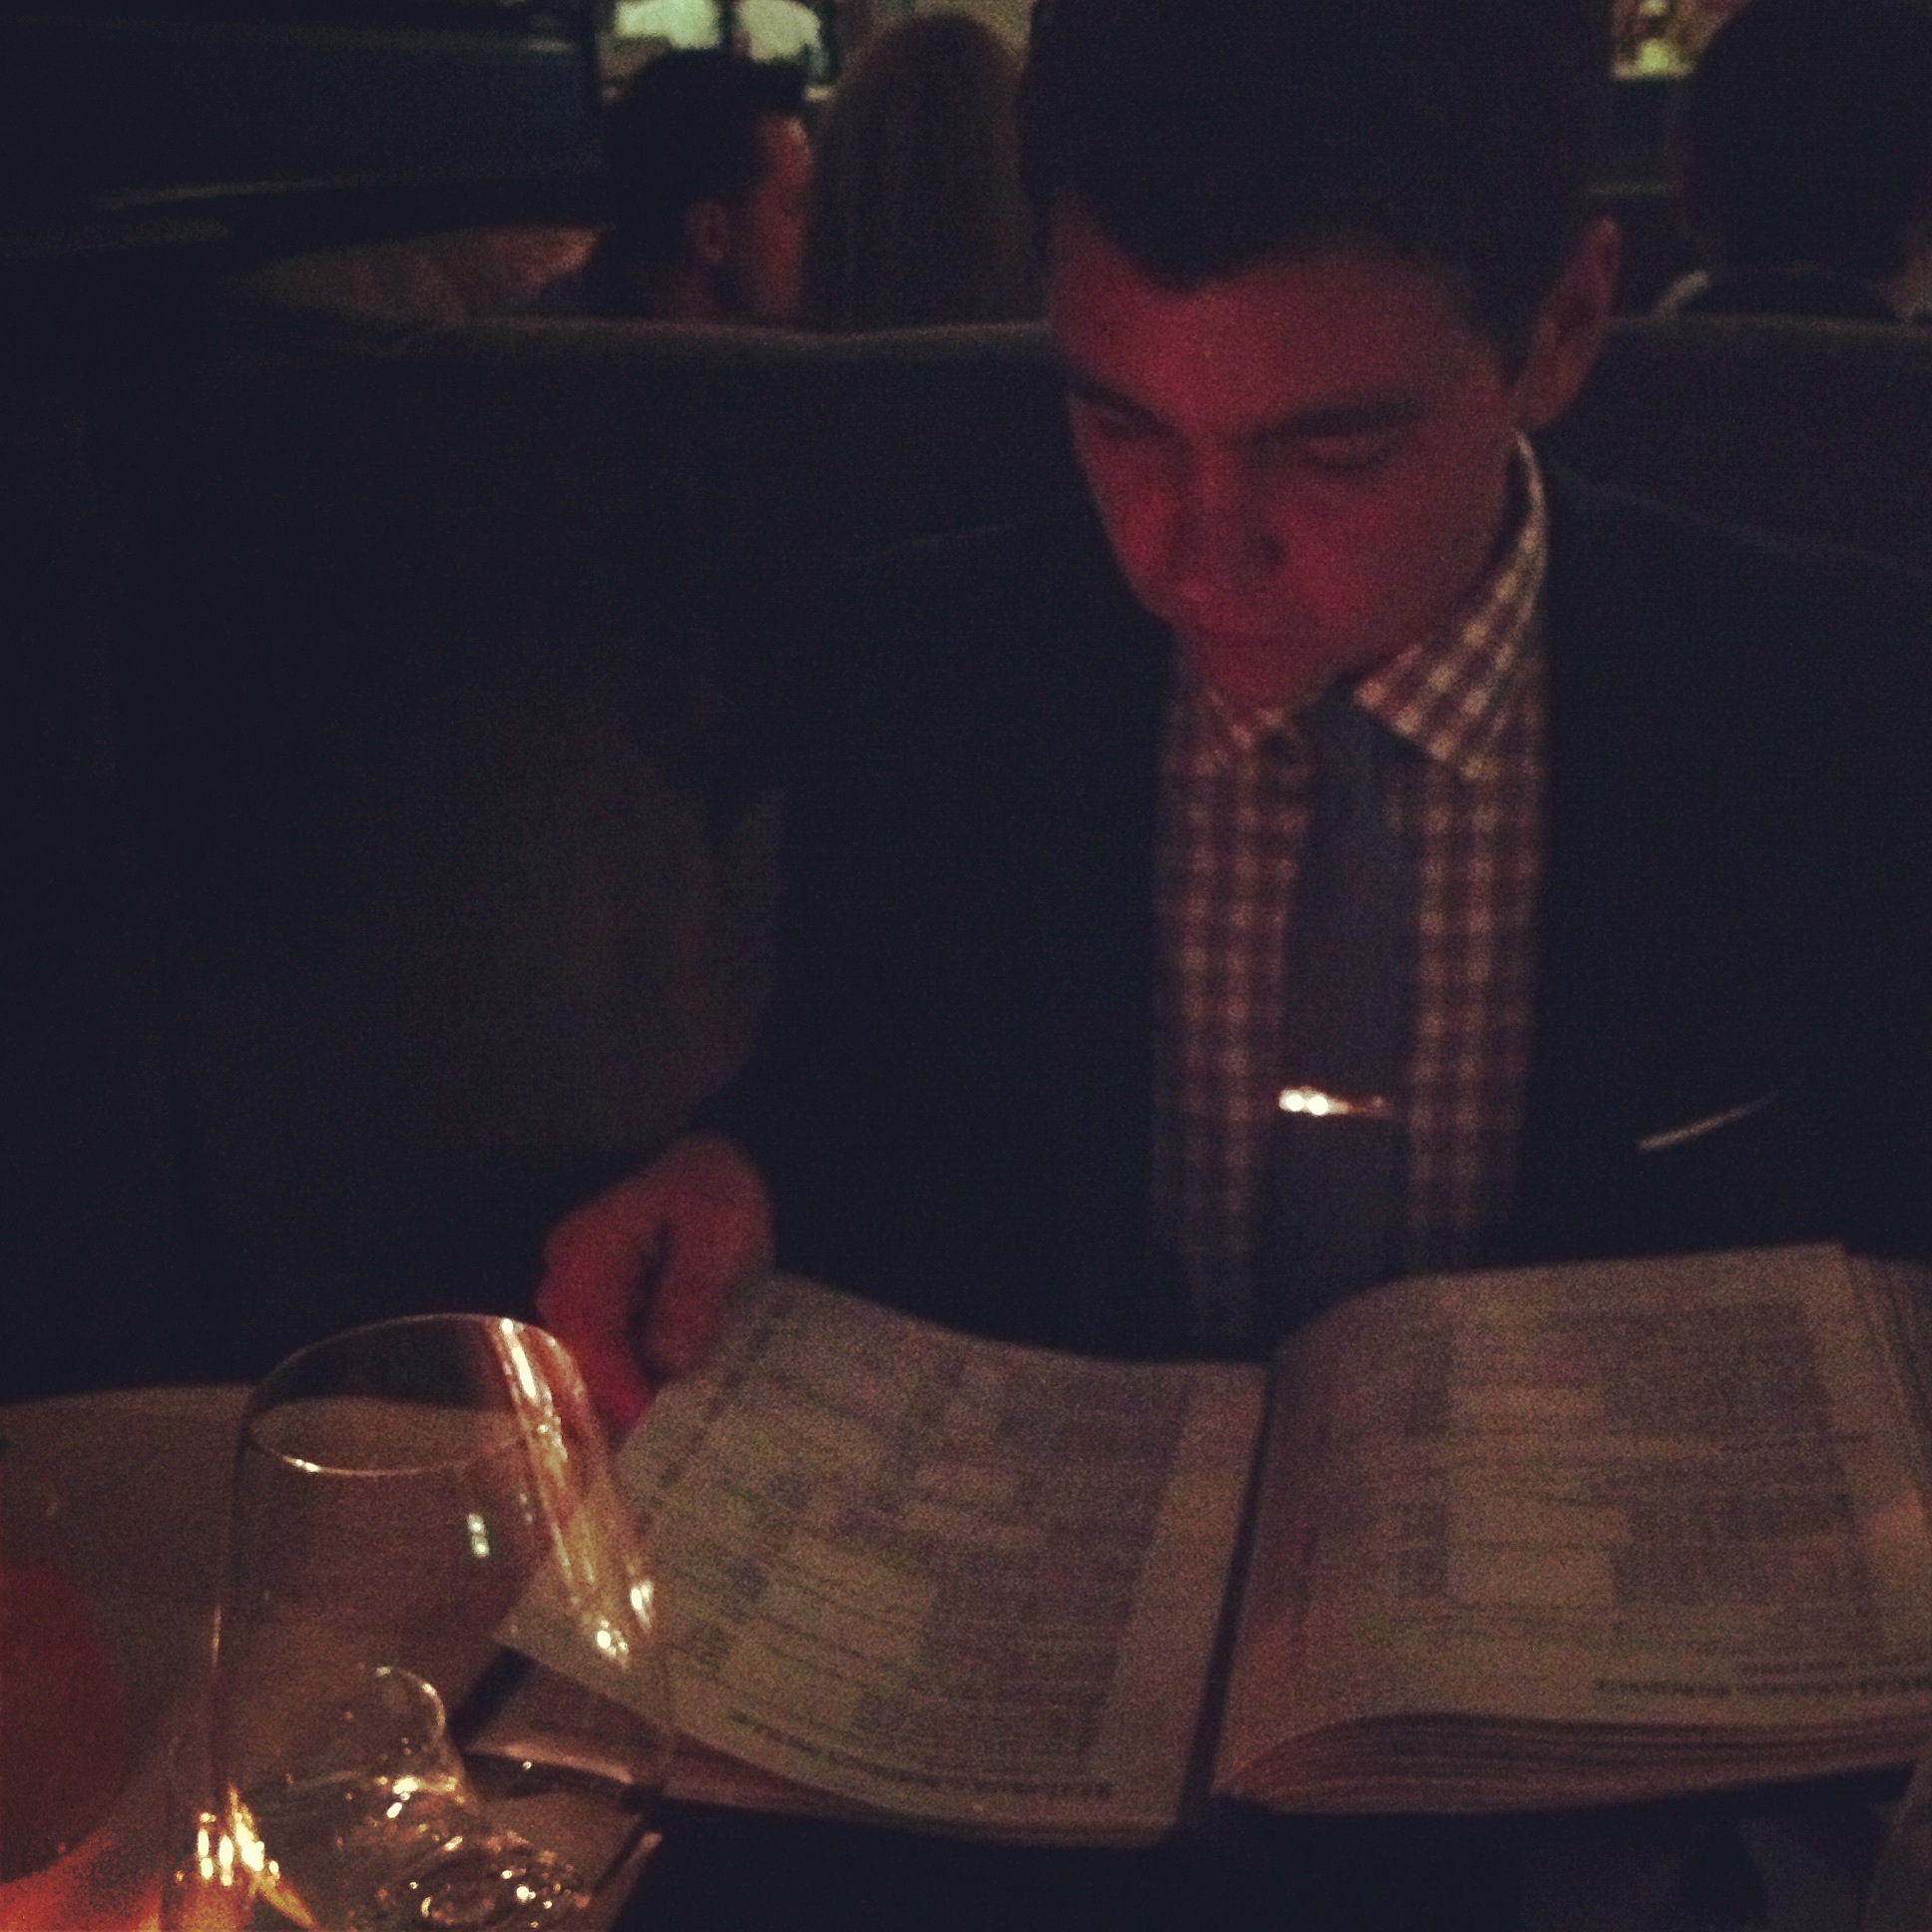  Getting deep into the textbook wine list at Harbour 60 in Toronto. Bad place to take me on a date... 